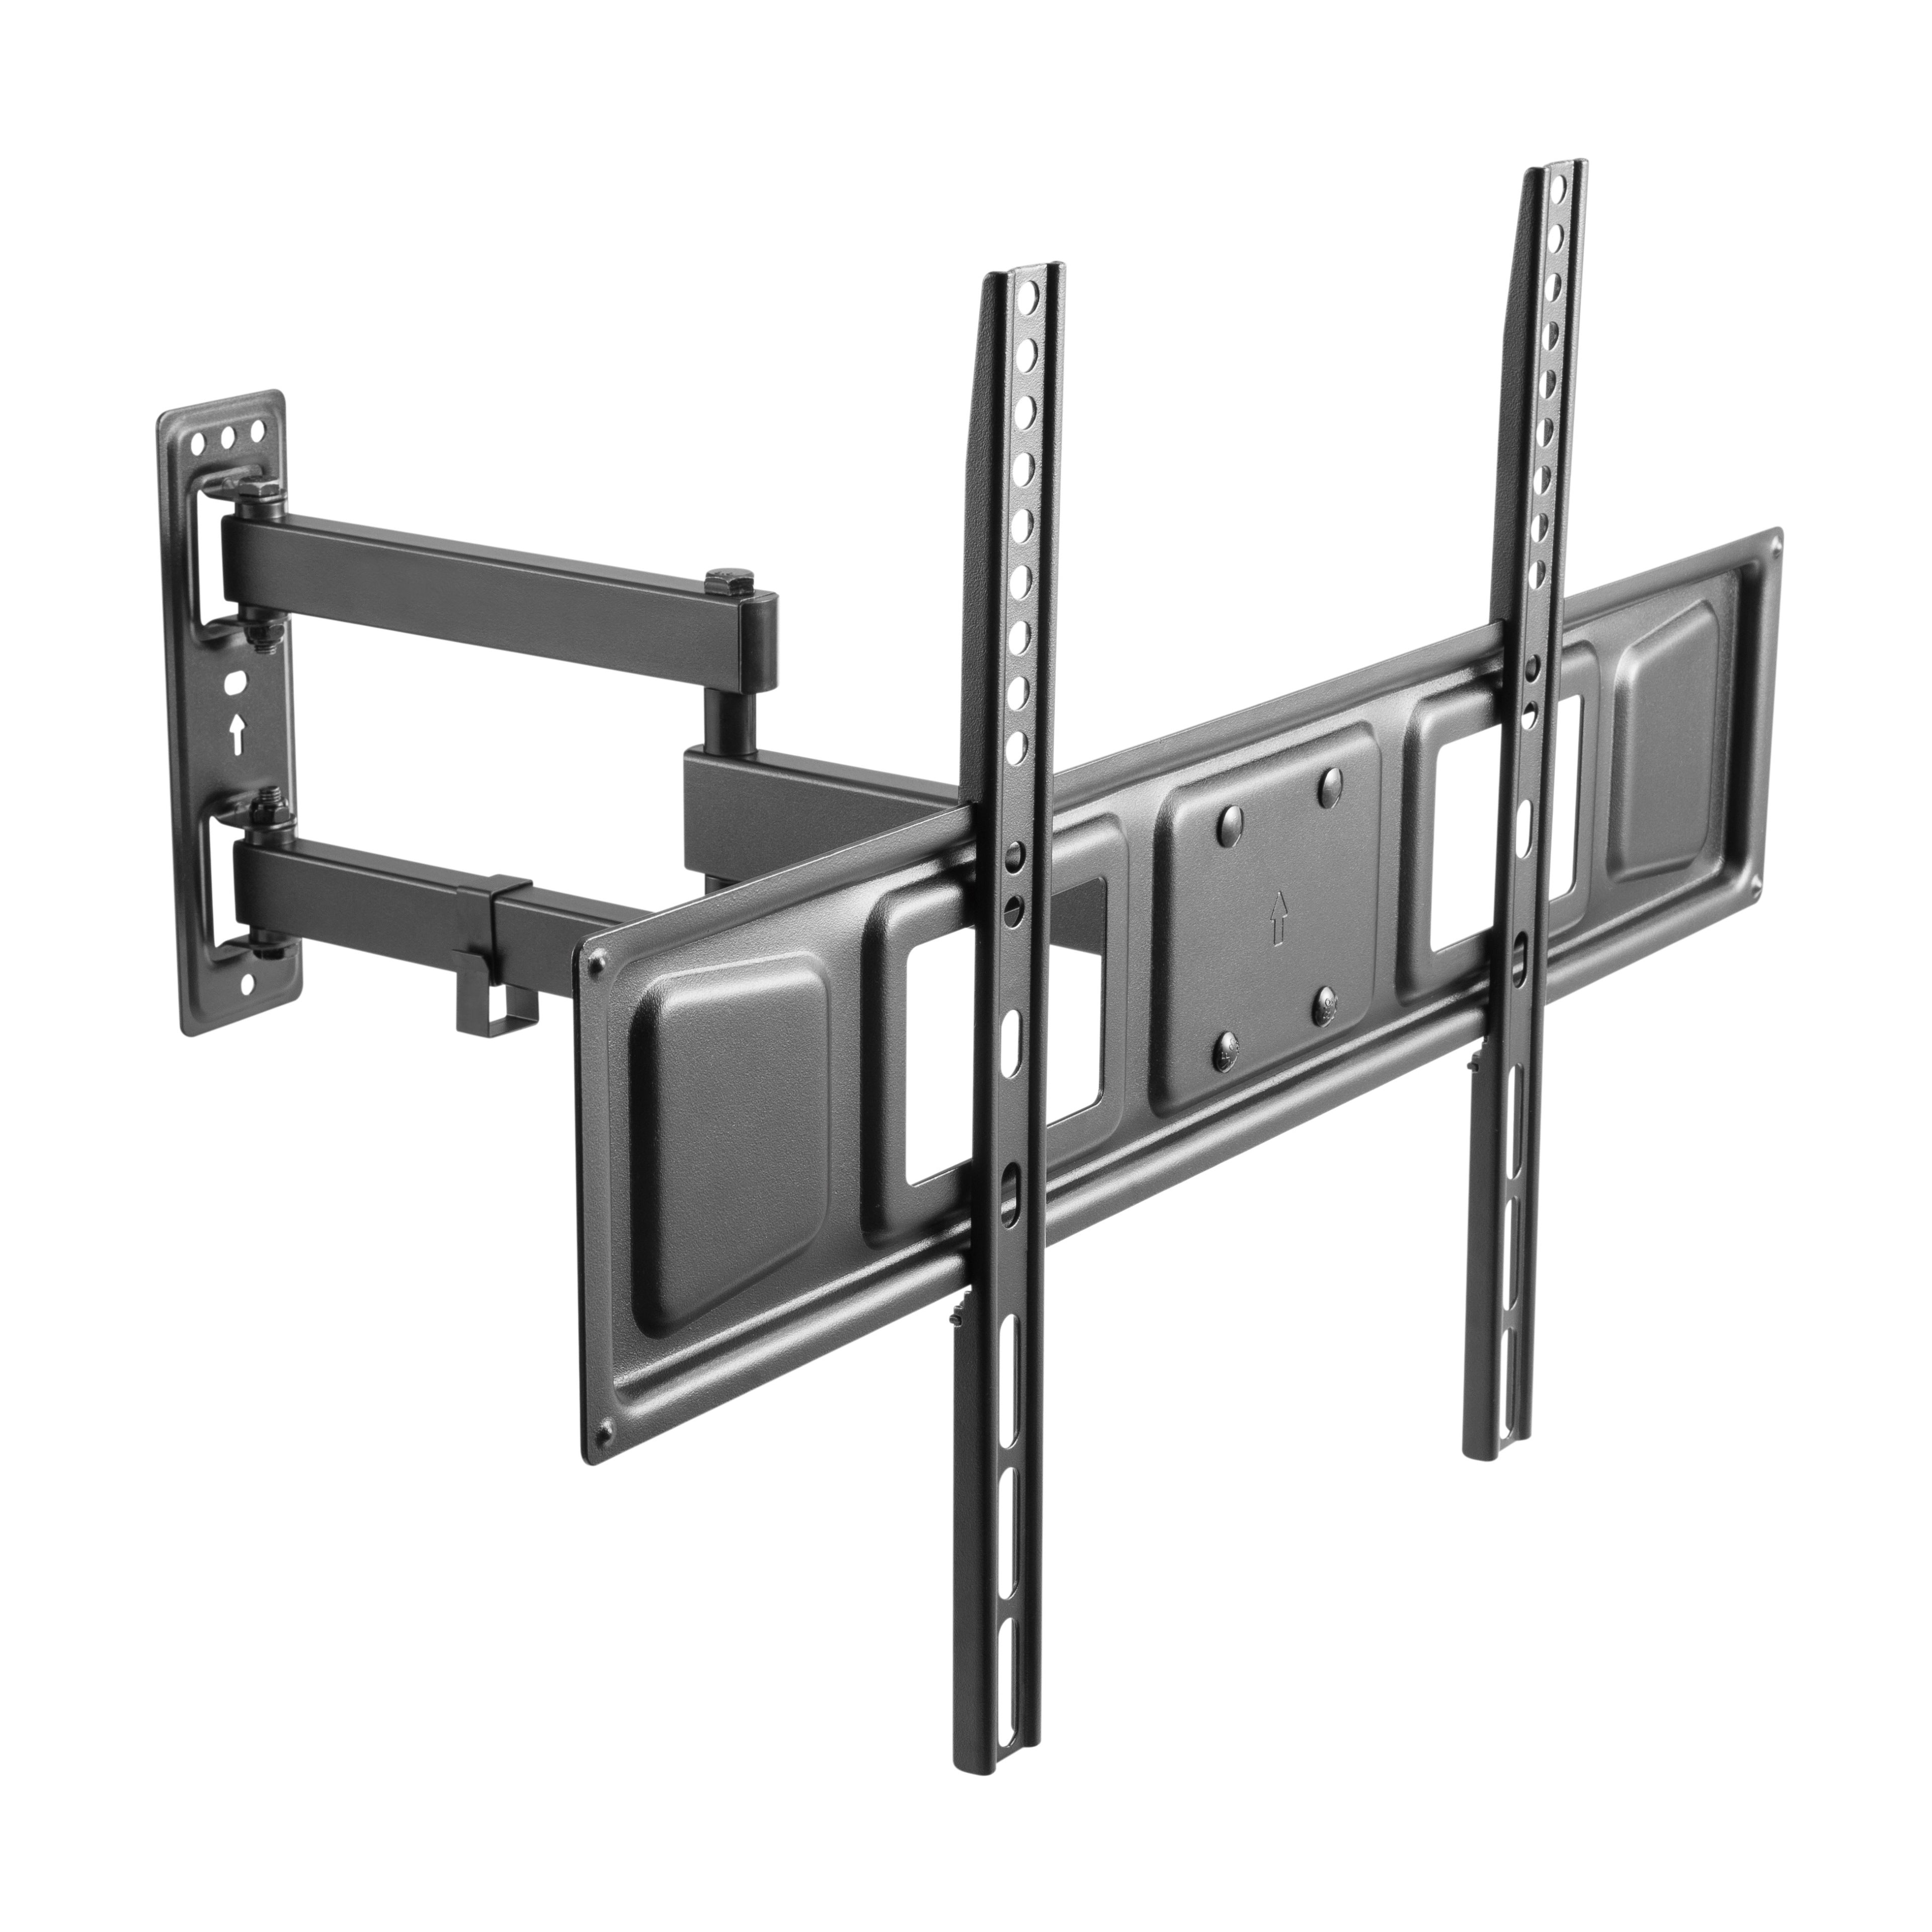 Deals on TV brackets and monitor mounts with Maplin's Easter Sale!